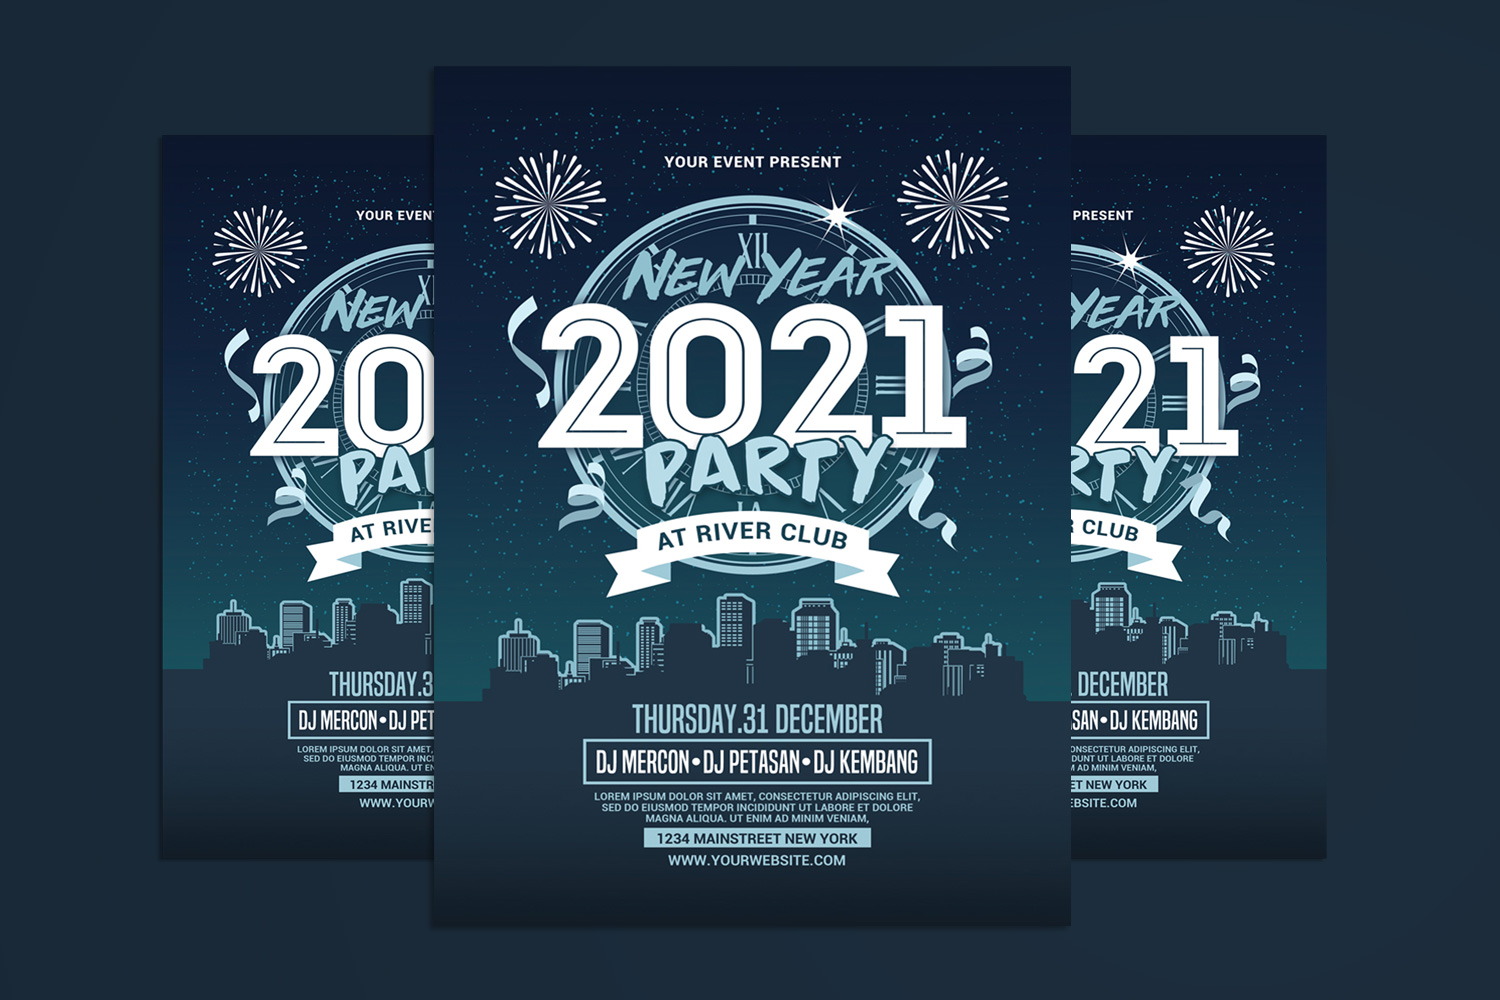 New Year Flyer 2021 - Corporate Identity Template